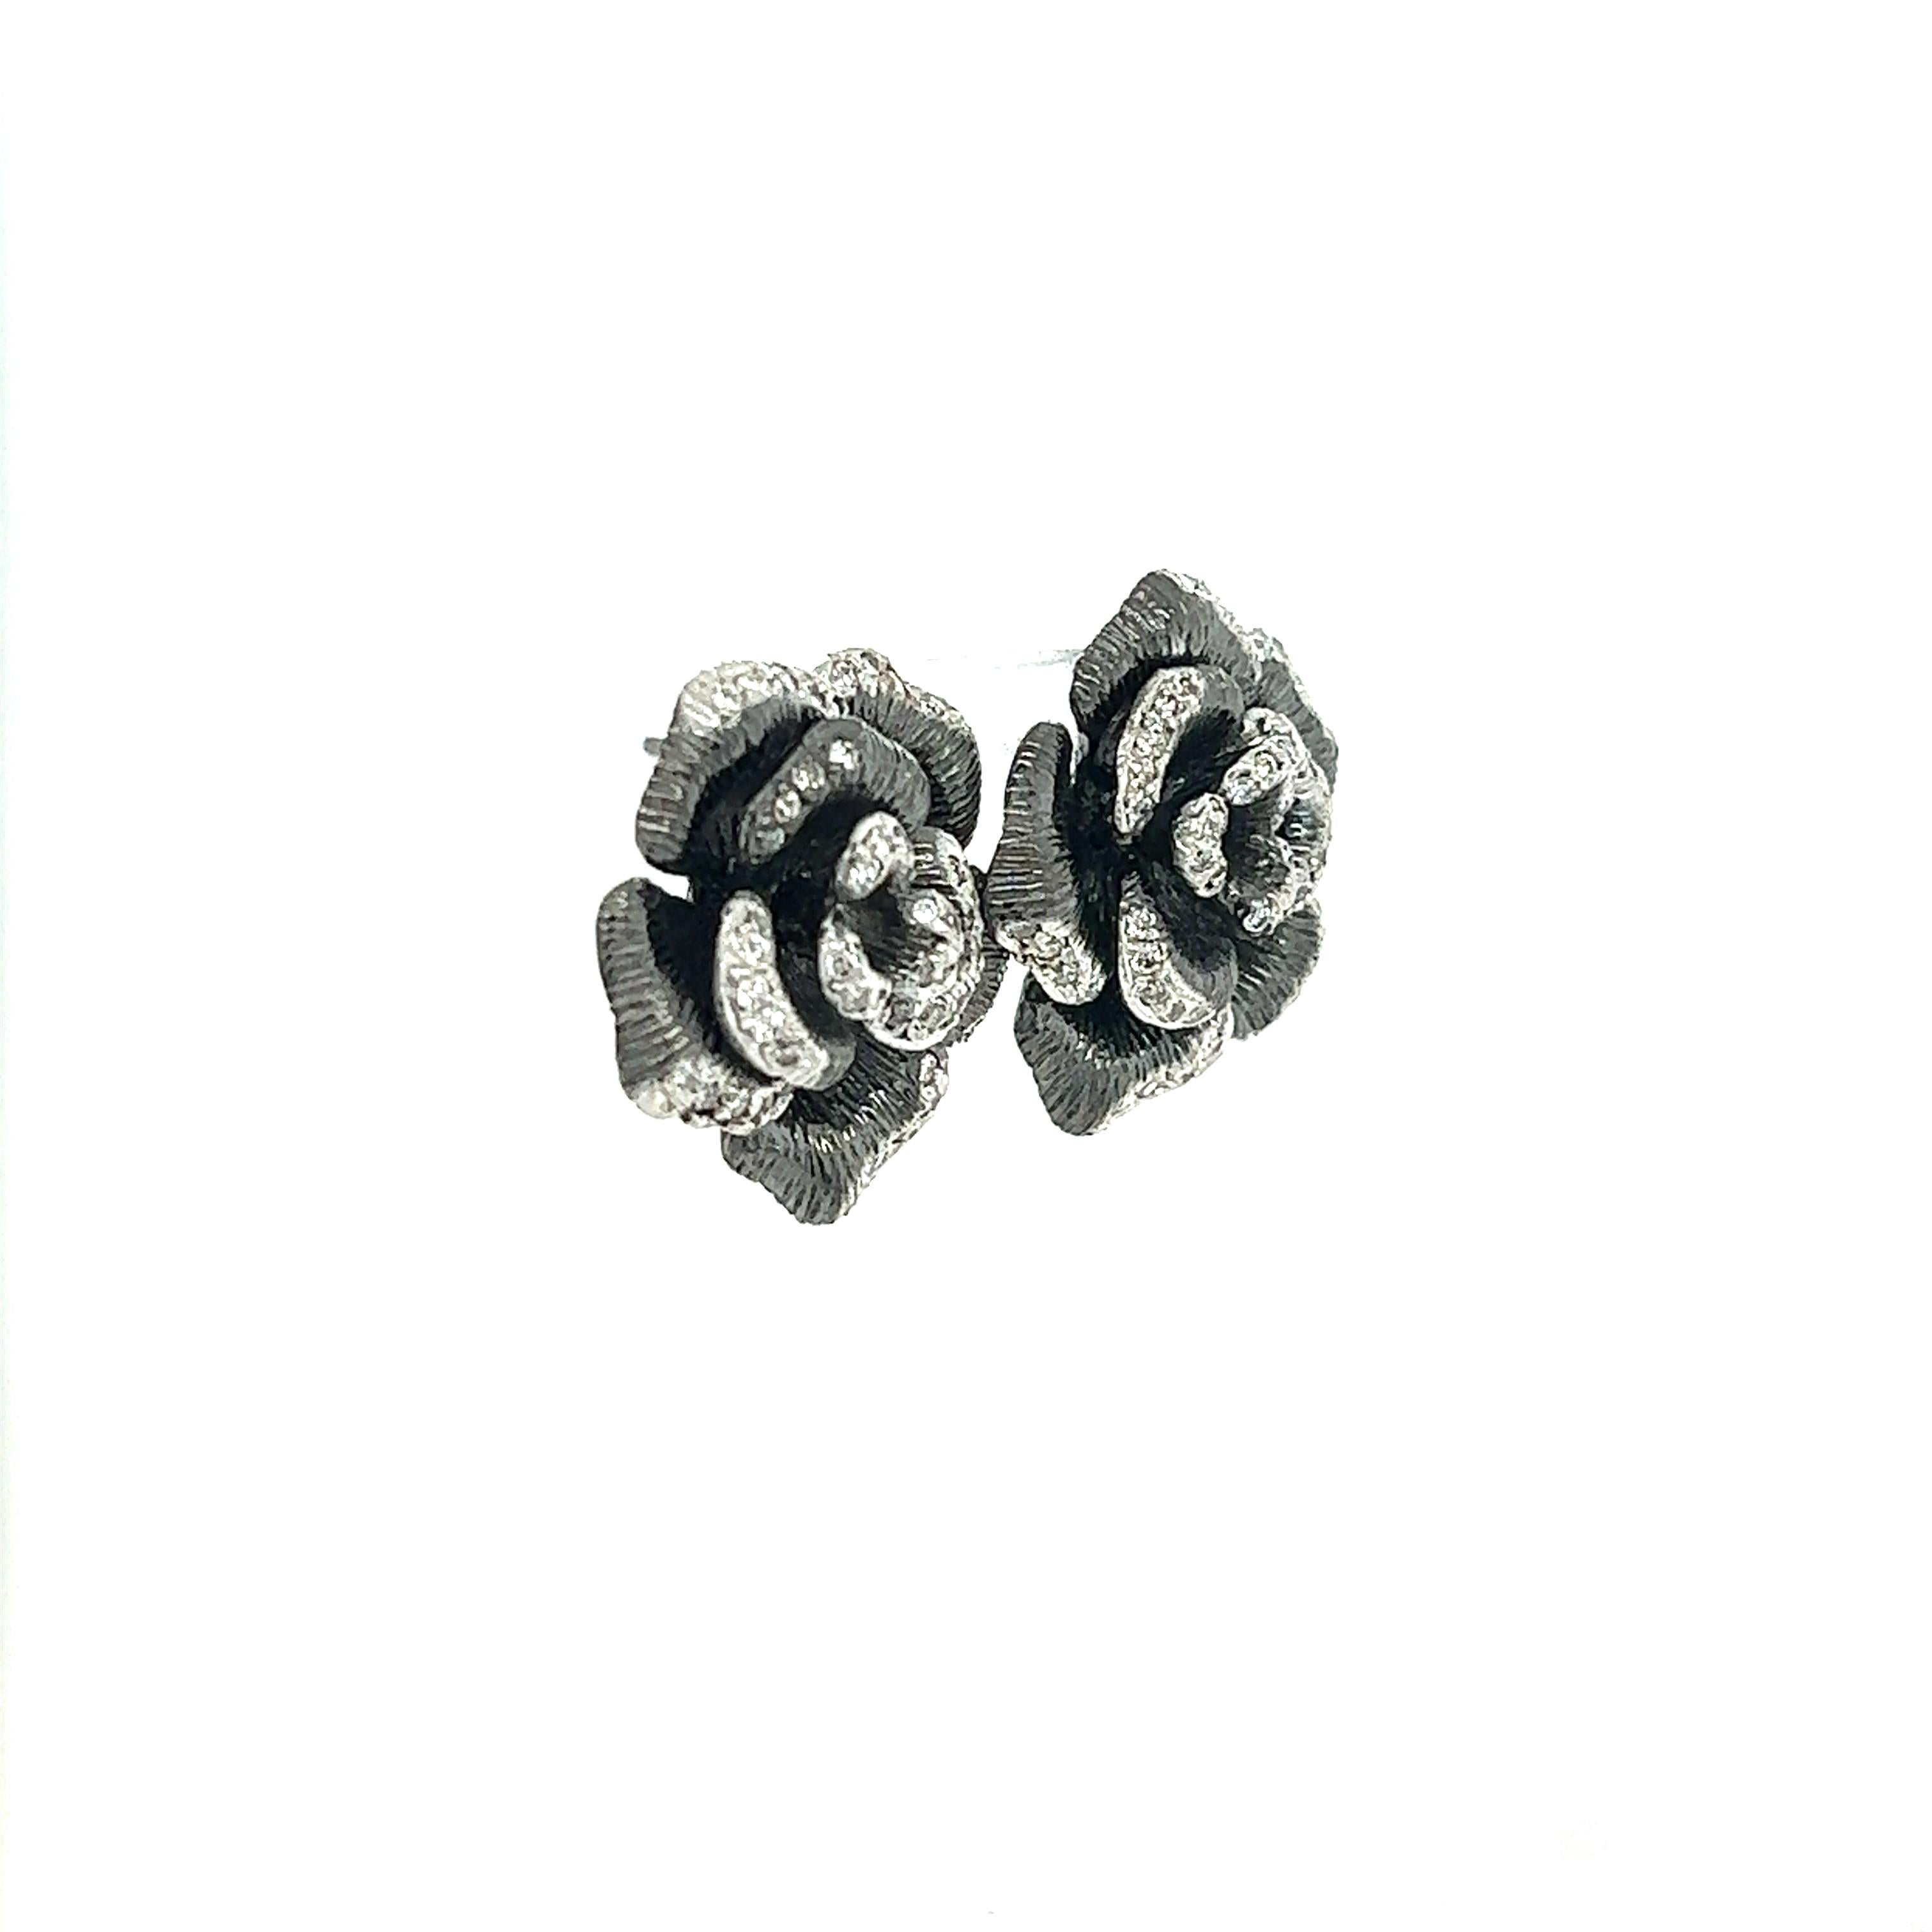 These beautiful flower earrings are set in 18 Karat Gold and has a Black Rhodium finish. 
There are 0.65 carats of Natural Round Cut Diamonds that have a clarity and color of VS-F. 

The earrings have an approximate weight of 11.0 grams. 